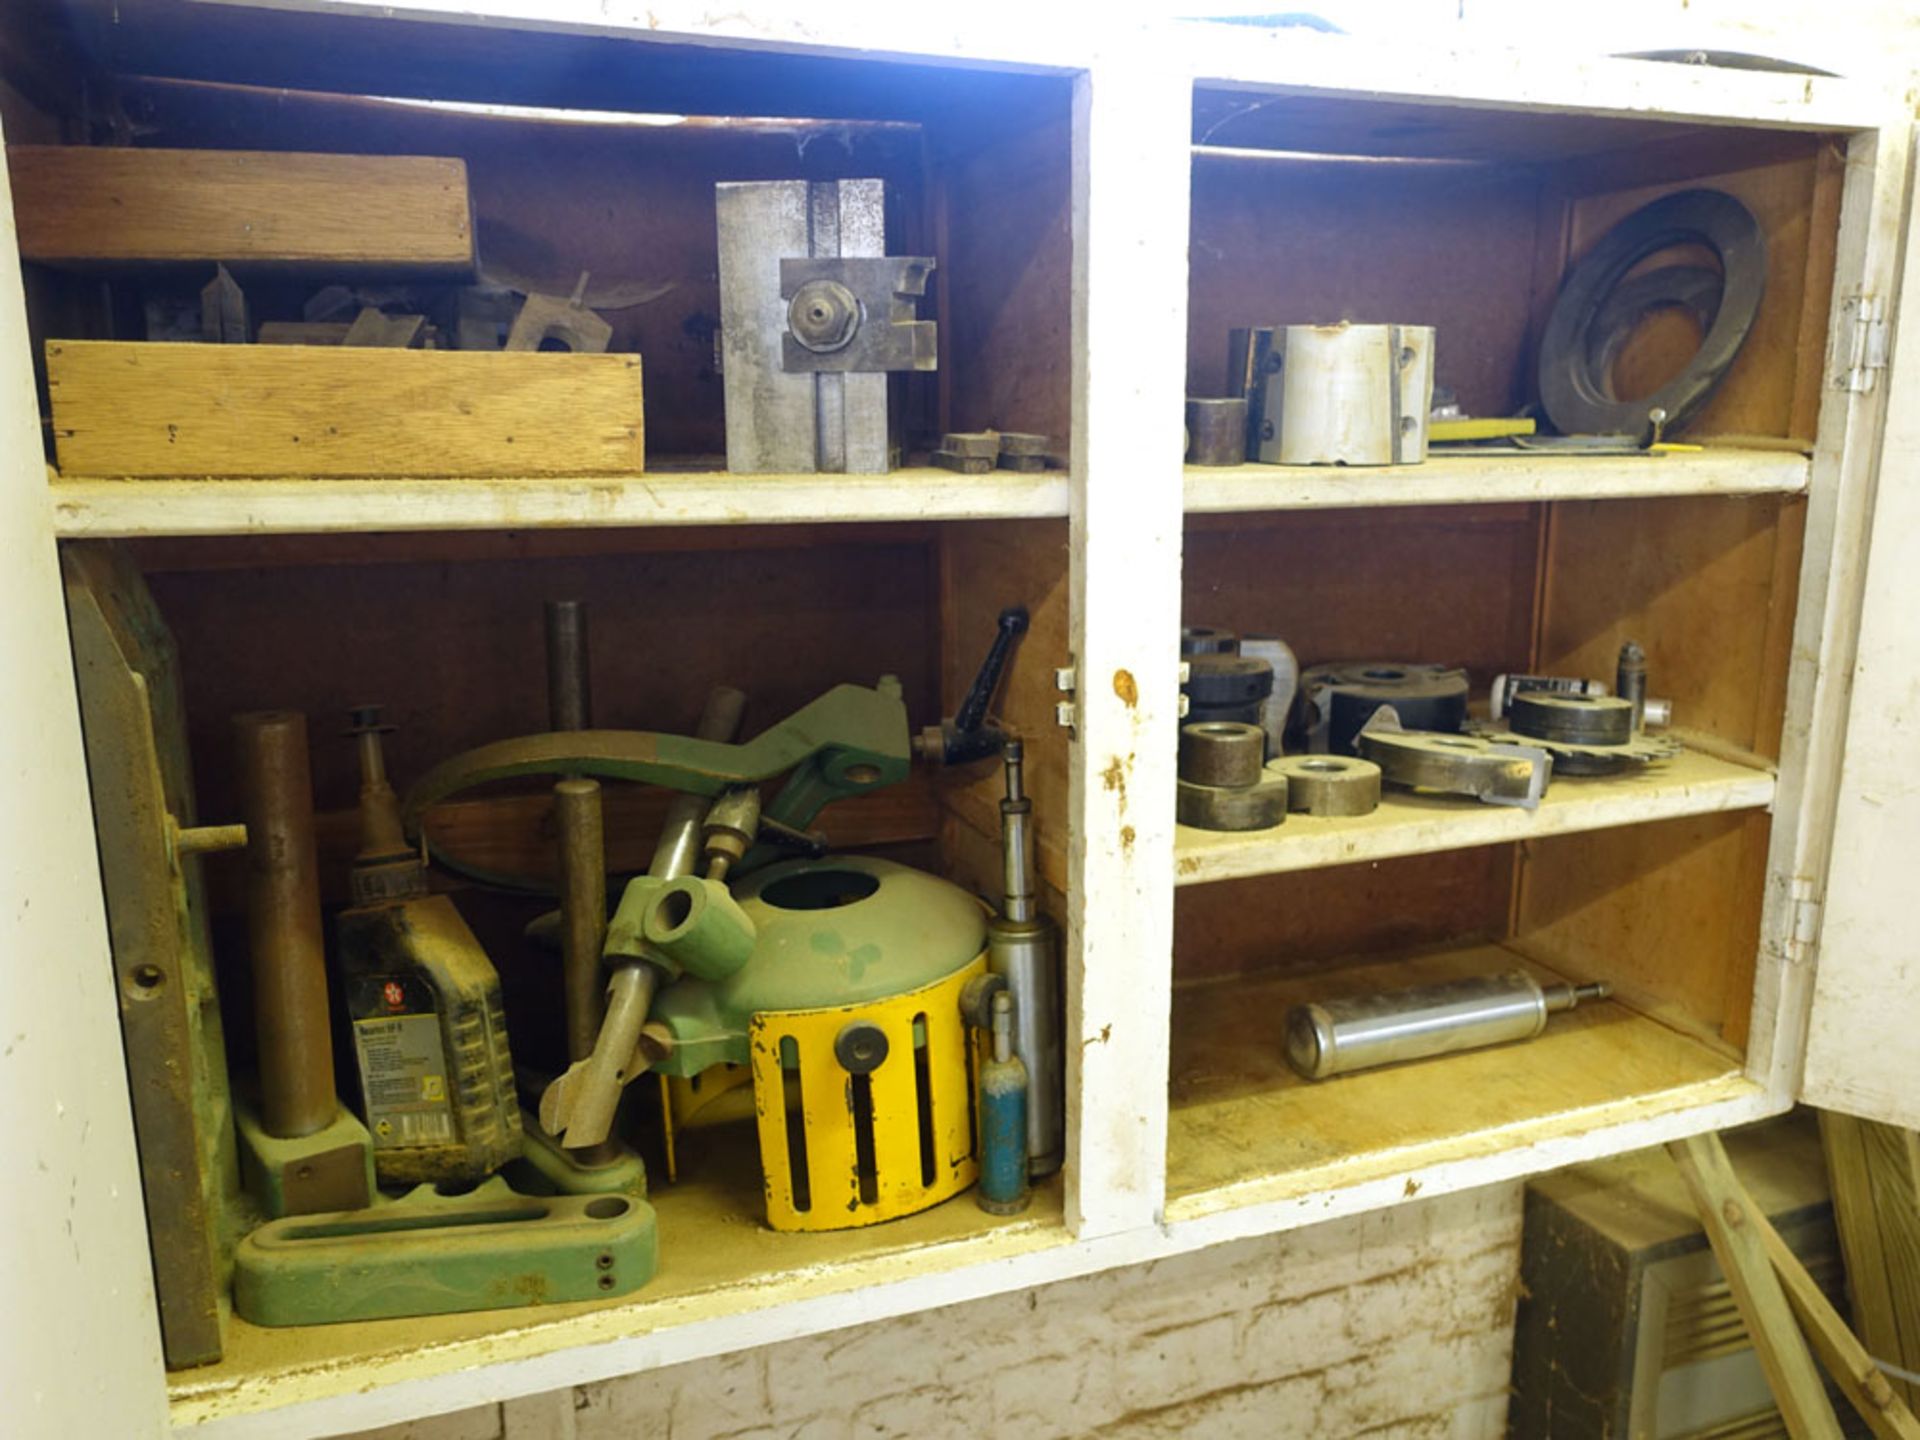 Wadkin Bursgreen spindle molder model BER3, serial no 741122 together with a cabinet containing a - Image 4 of 5